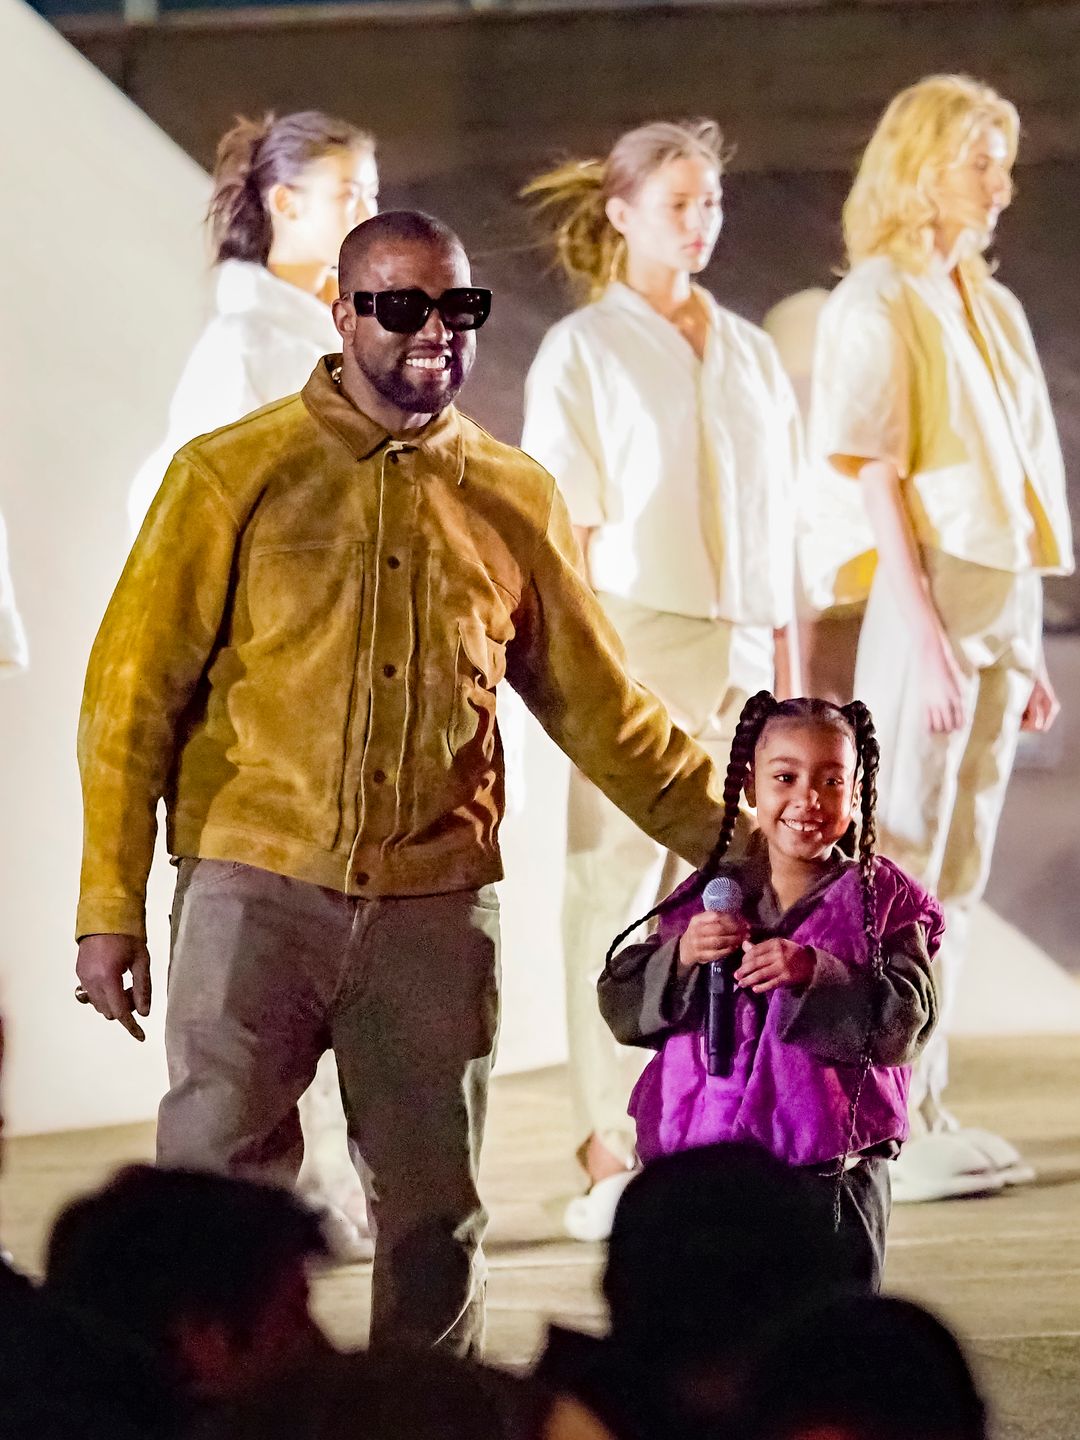 North West smiling on stage holding a mic next to her father Kanye